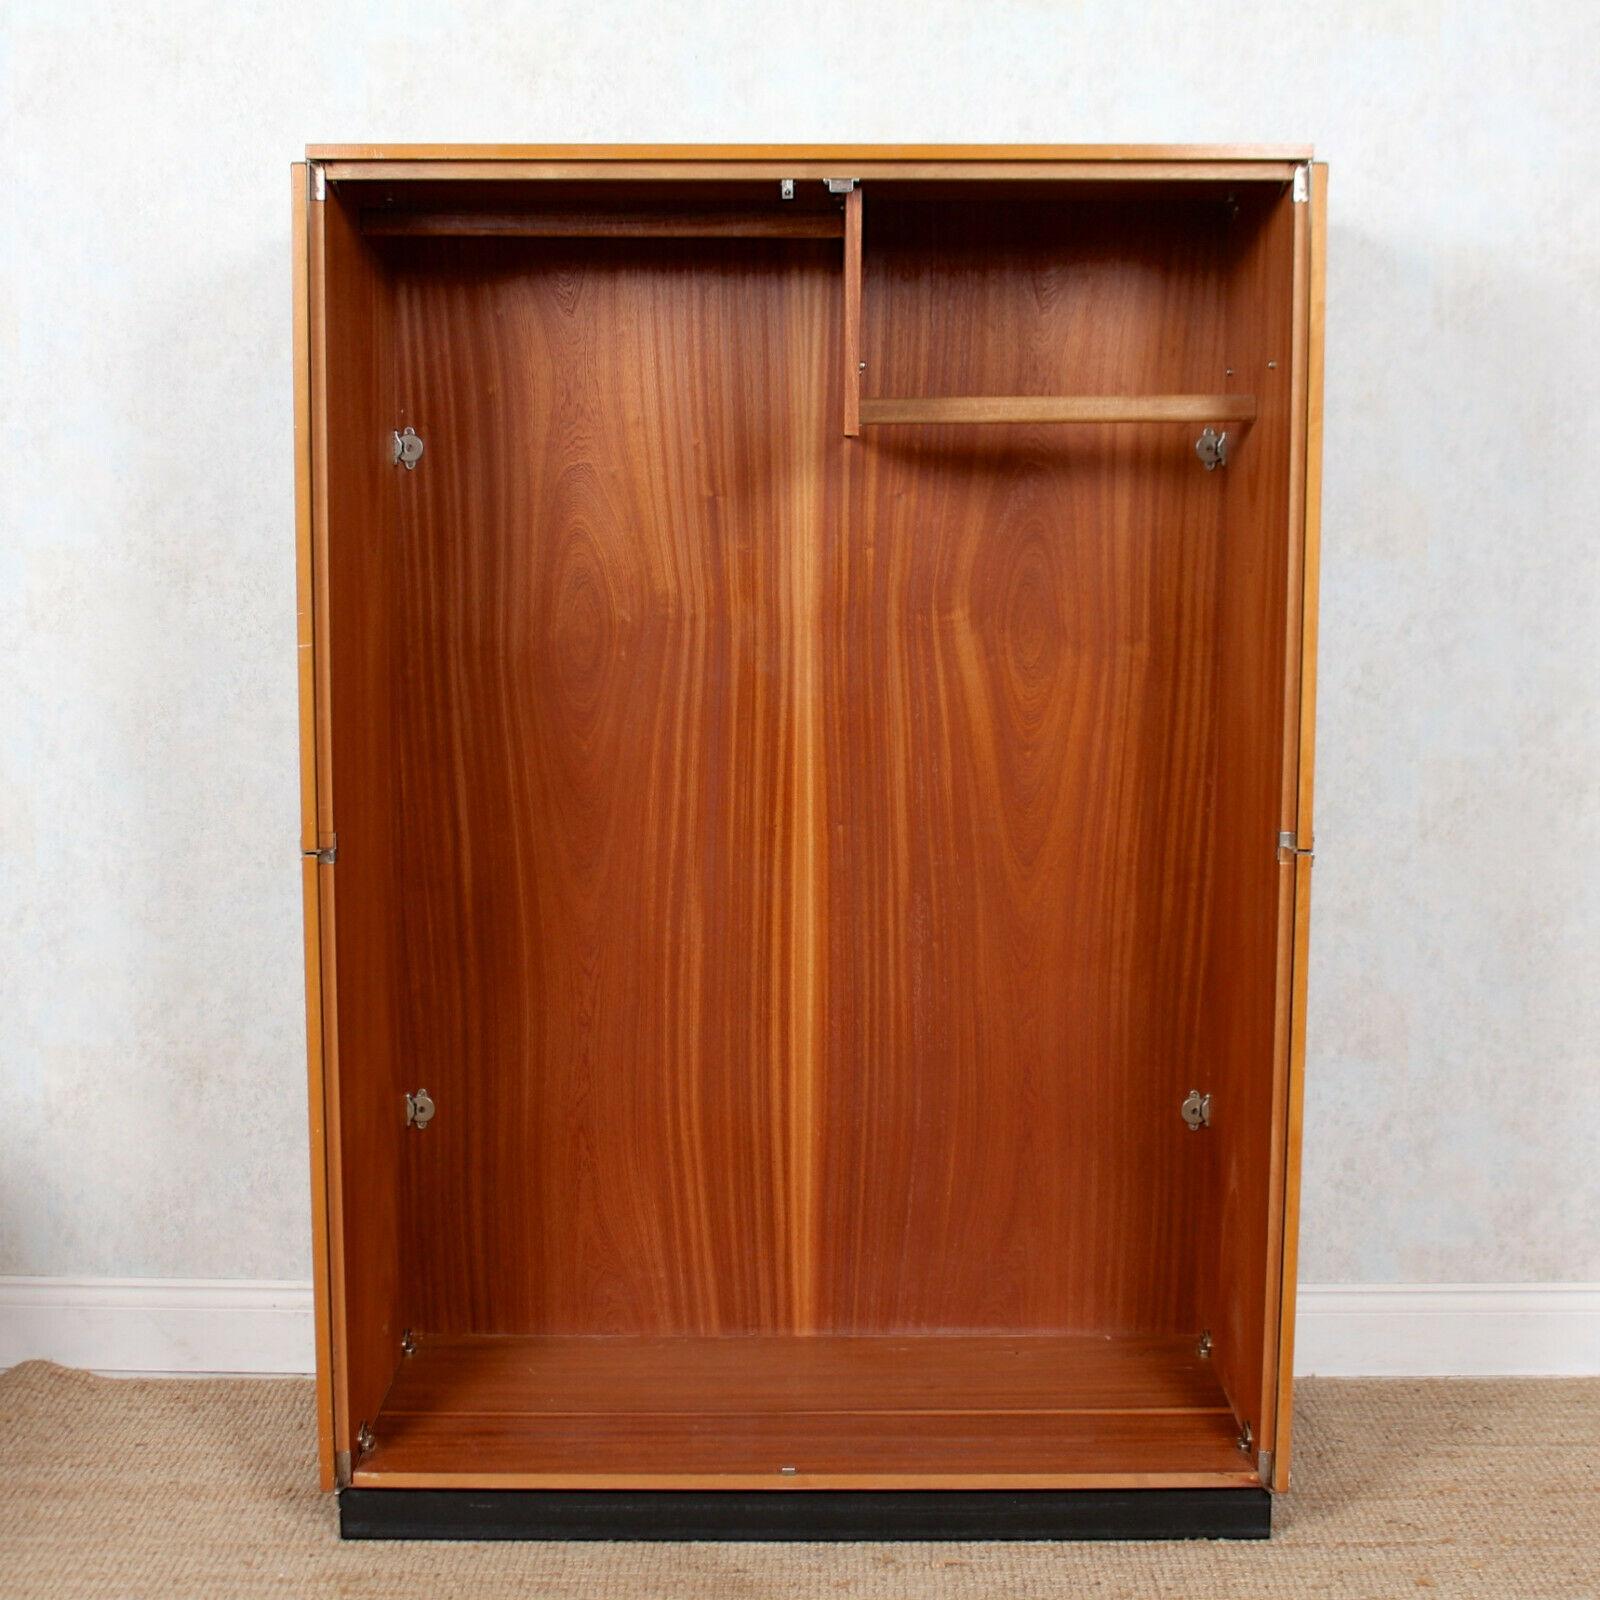 An impressive and rare model double wardrobe by Stage.
The fully retractable doors, mounted with good original handles, enclosed two hanging rails and raised on an ebonized plinth base.
England, circa 1975.